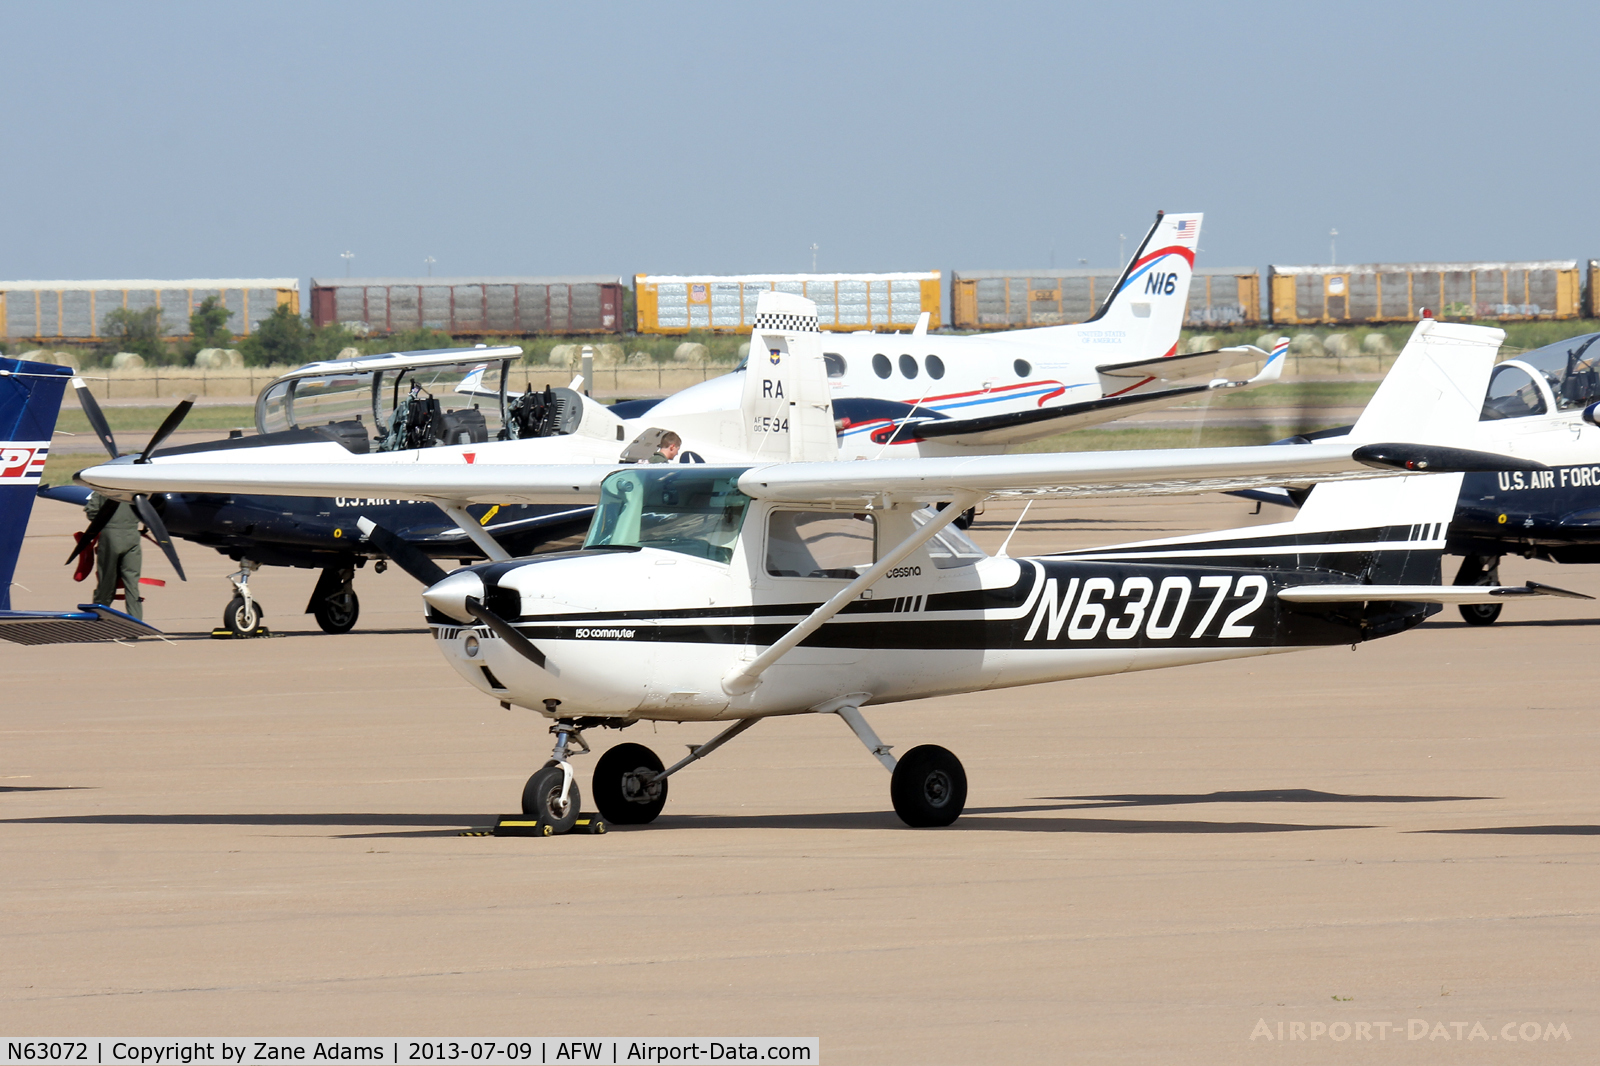 N63072, 1975 Cessna 150M C/N 15077080, At Alliance Airport - Fort Worth, TX